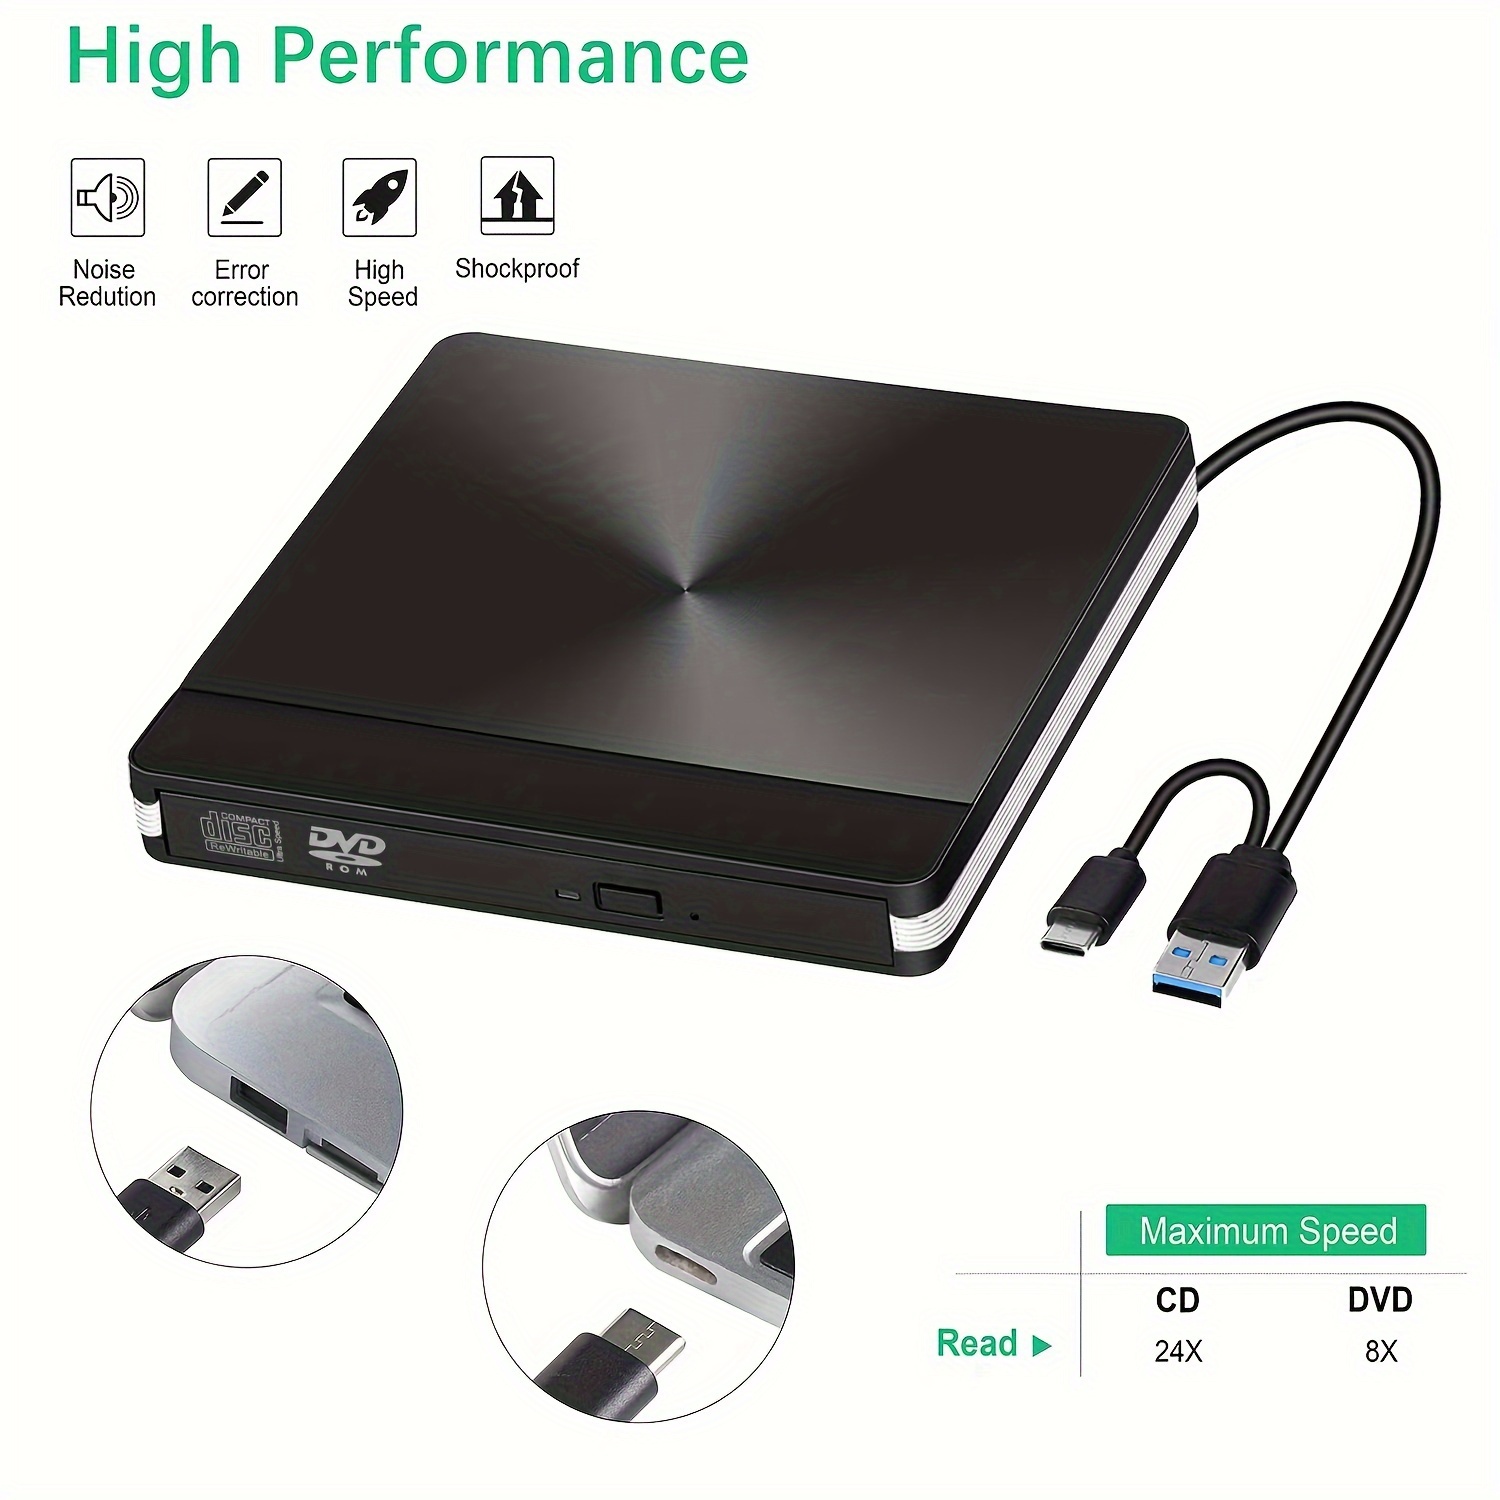 

Optical Drive Interface Usb3.0 And Type C External Drive Dvd Disc Drive, Supporting Playback Without Burning Function, External Computer Mobile Burning Cd Player Portable Cd Dvd Drive